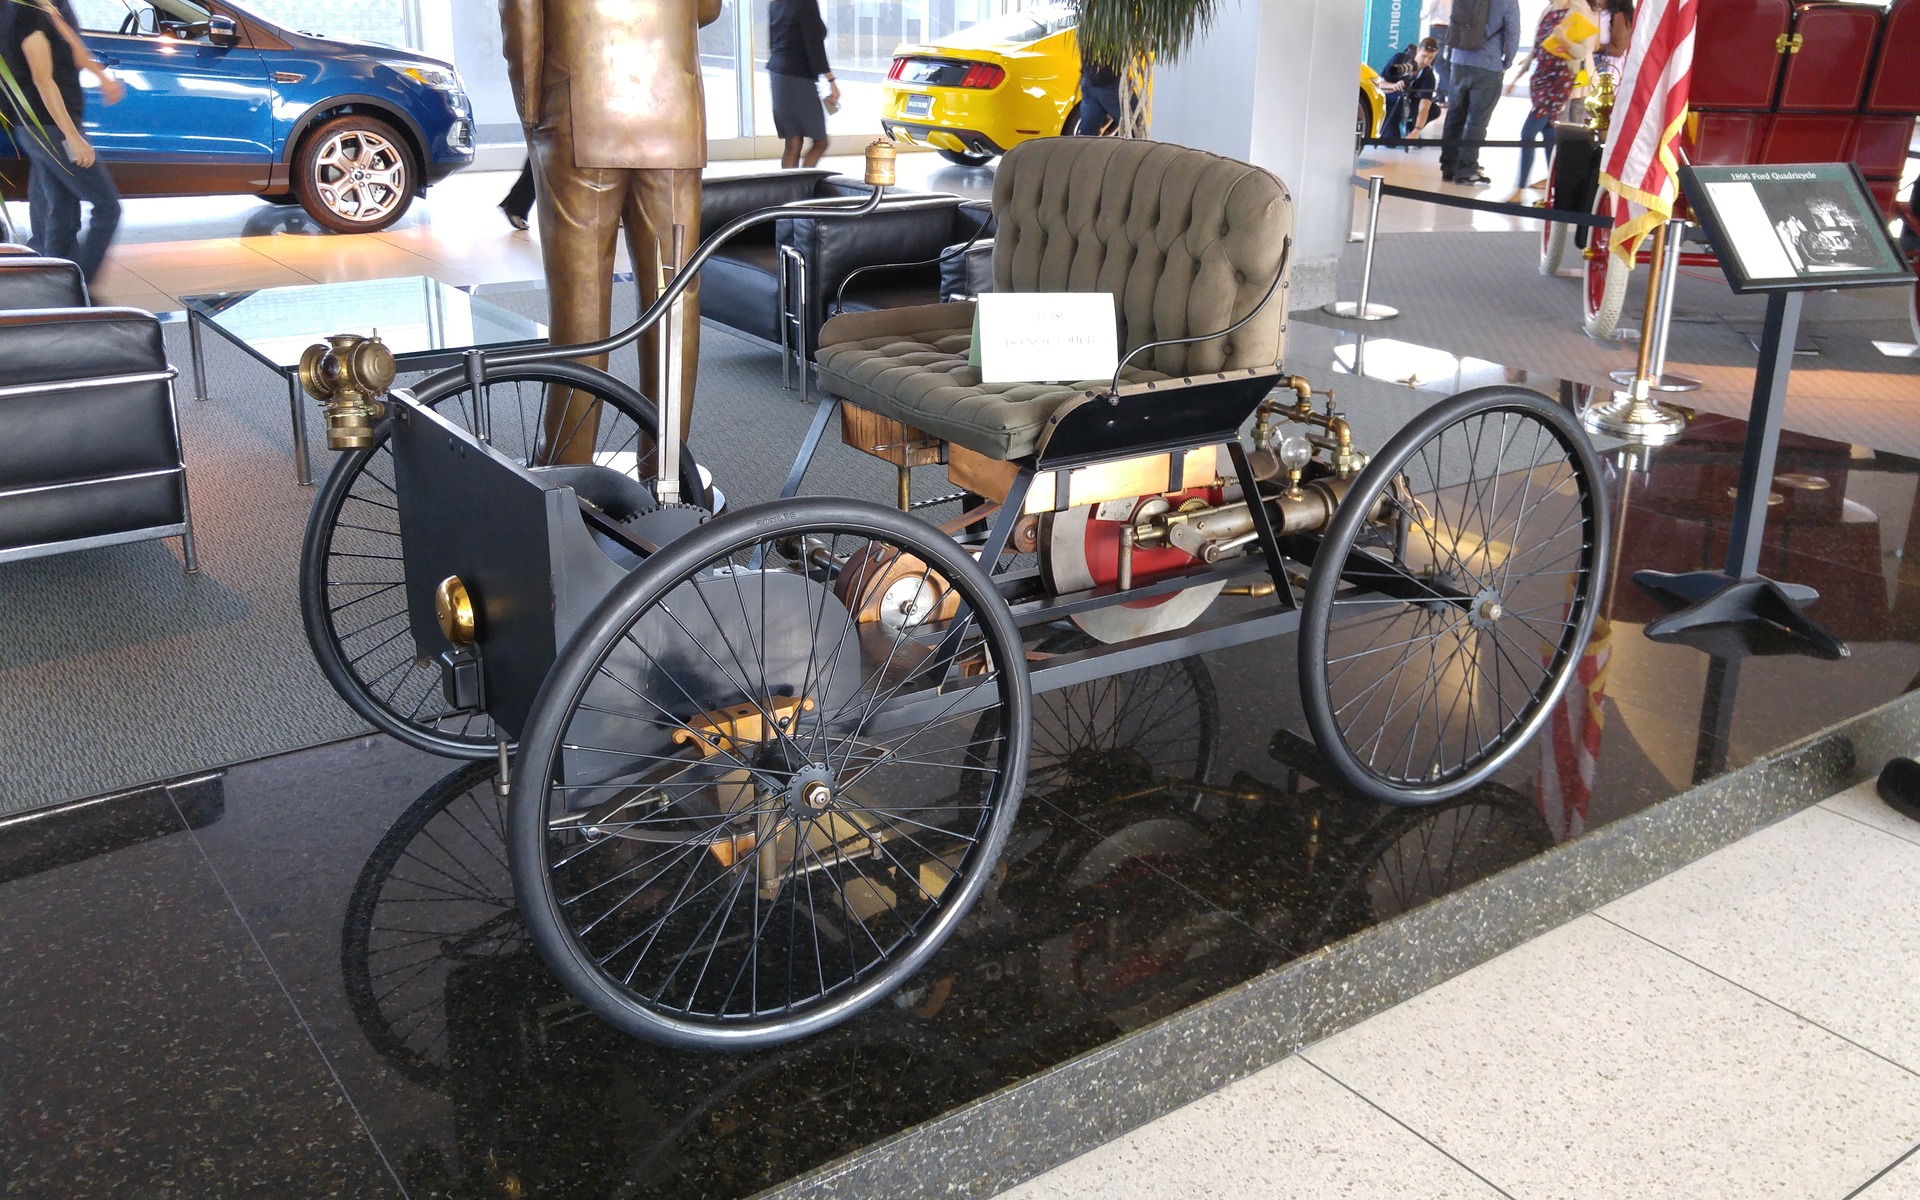 Replica of a 1896 Quadricycle, Henry Ford's first car